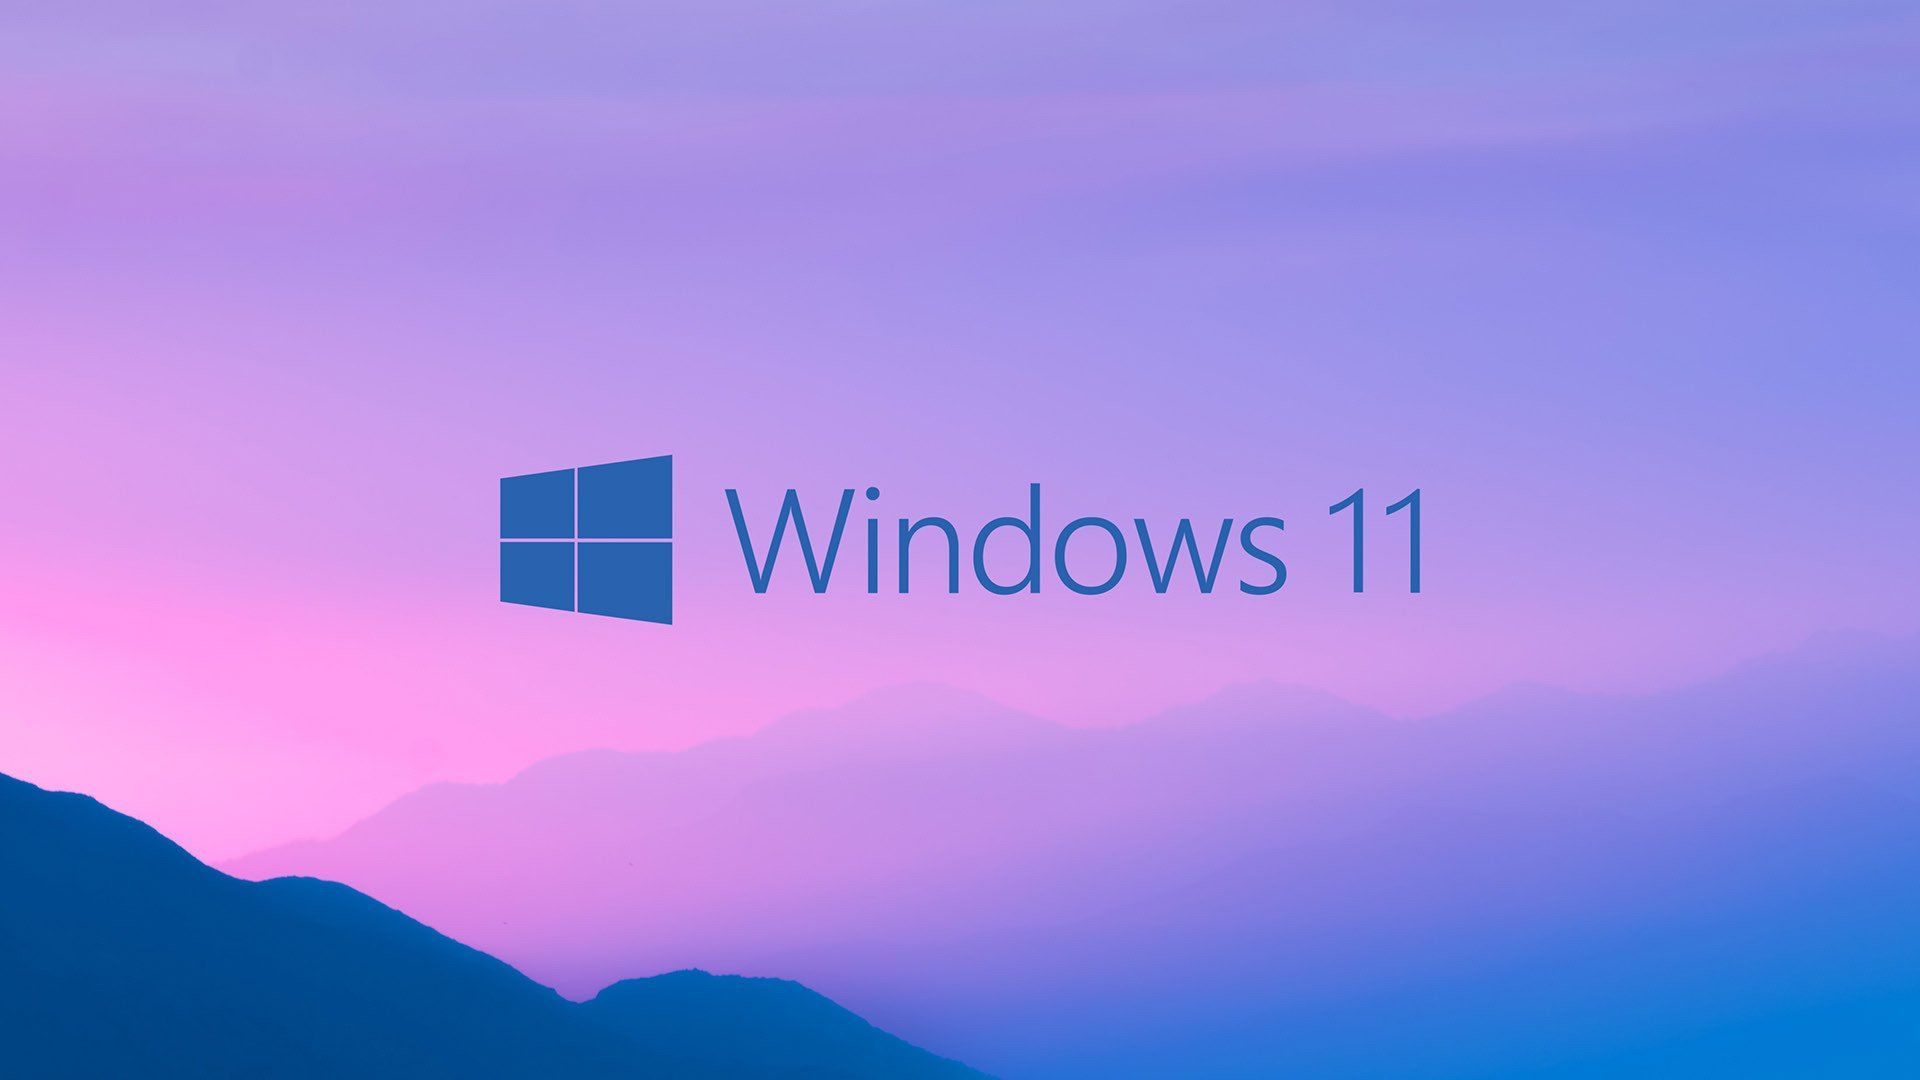 Windows 11 wallpaper for your 1920x1080 - Windows 11